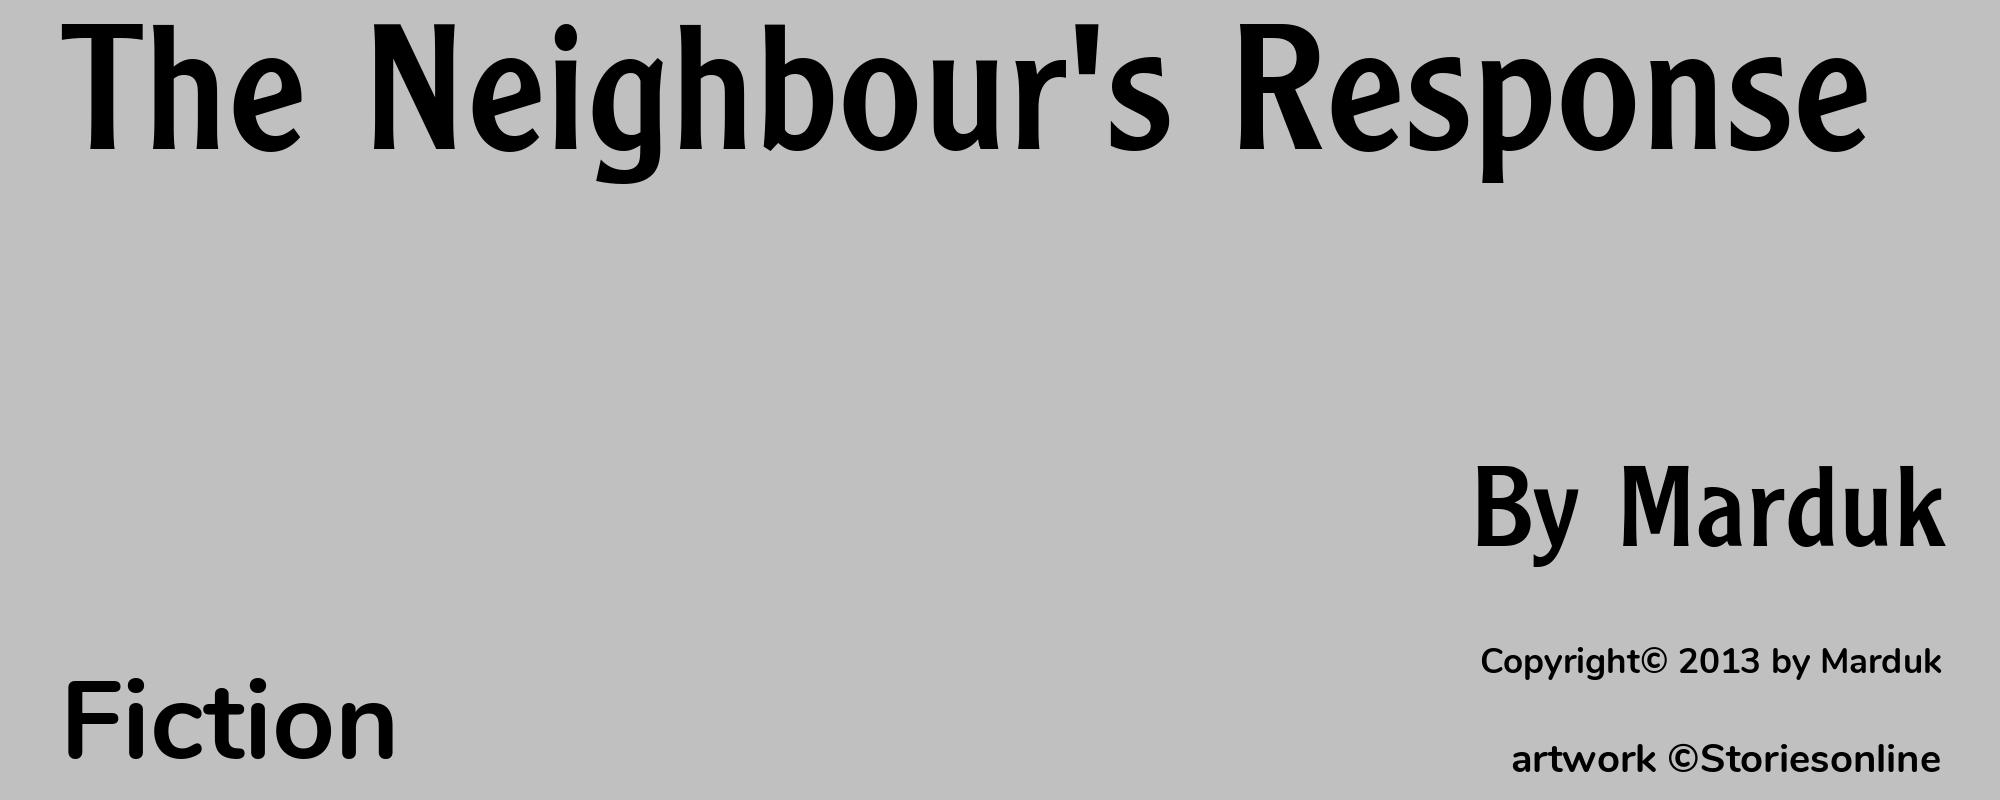 The Neighbour's Response - Cover